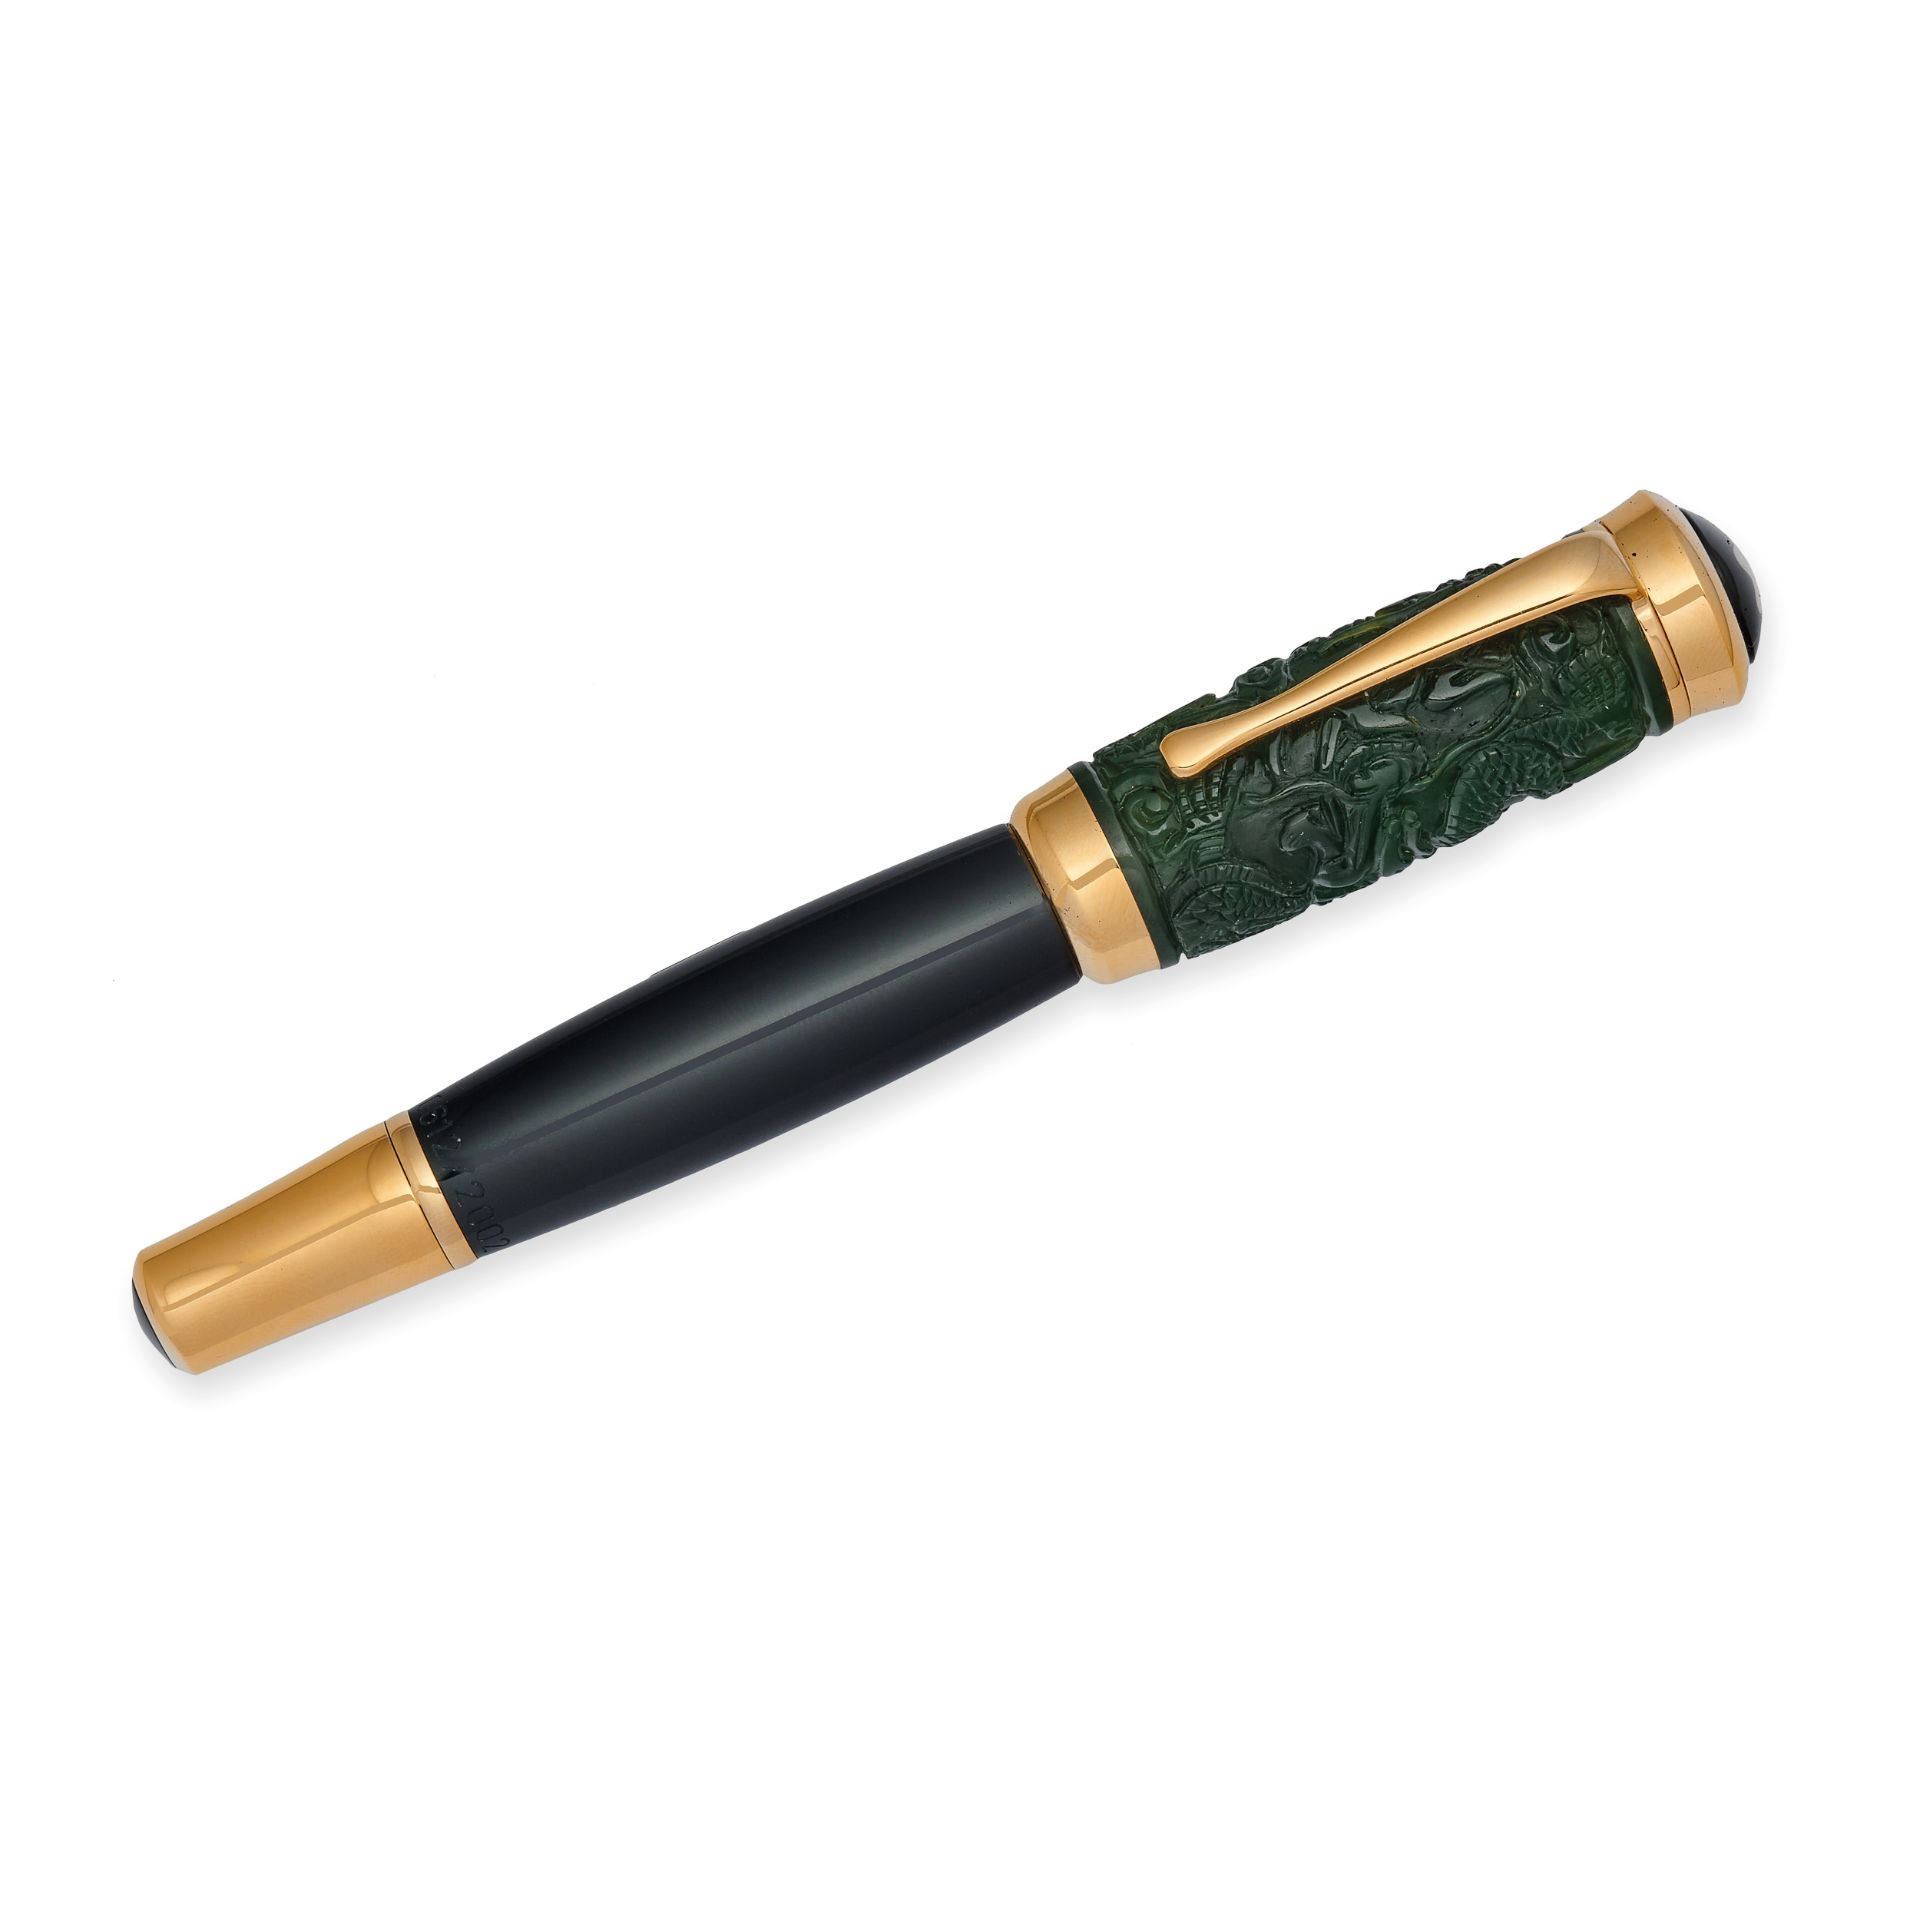 STYLO PLUME MONTBLANC QING DYNASTY EDITION LIMITÉE N. 06121/2002, ANNÉE 2002